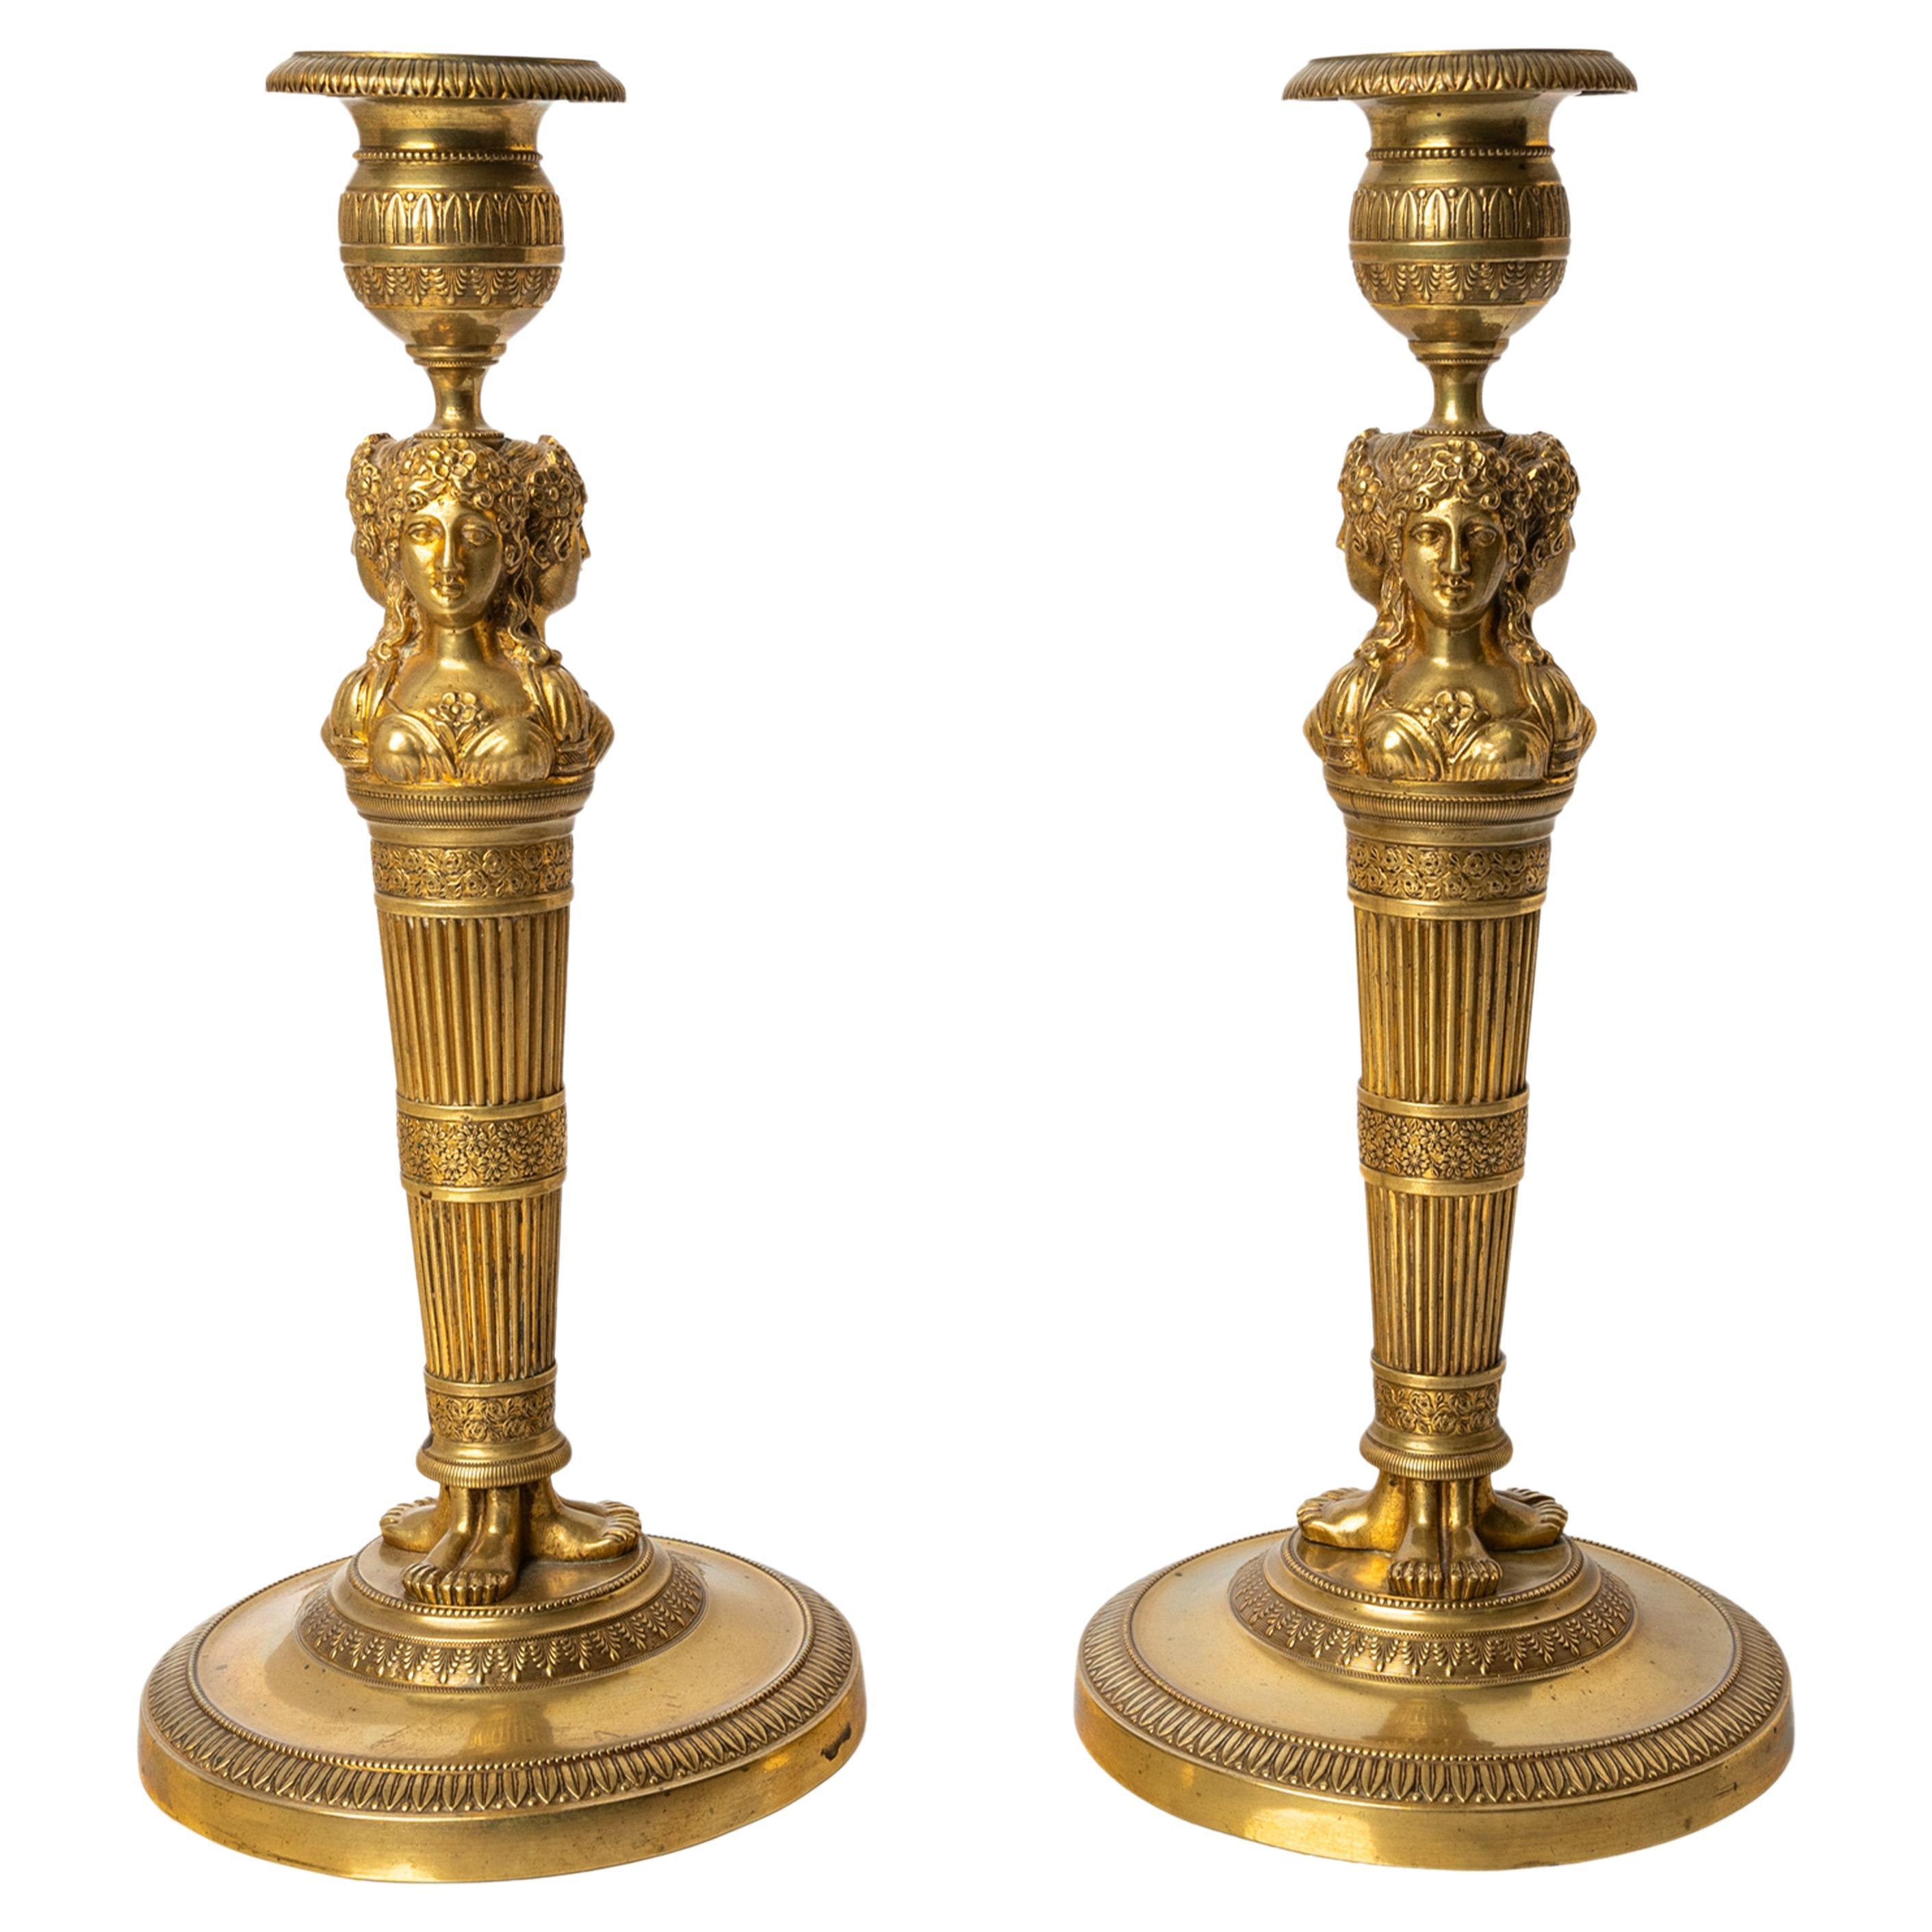 Pair Antique Early 19thC French Empire Neoclassical Gilt Bronze Candlesticks For Sale